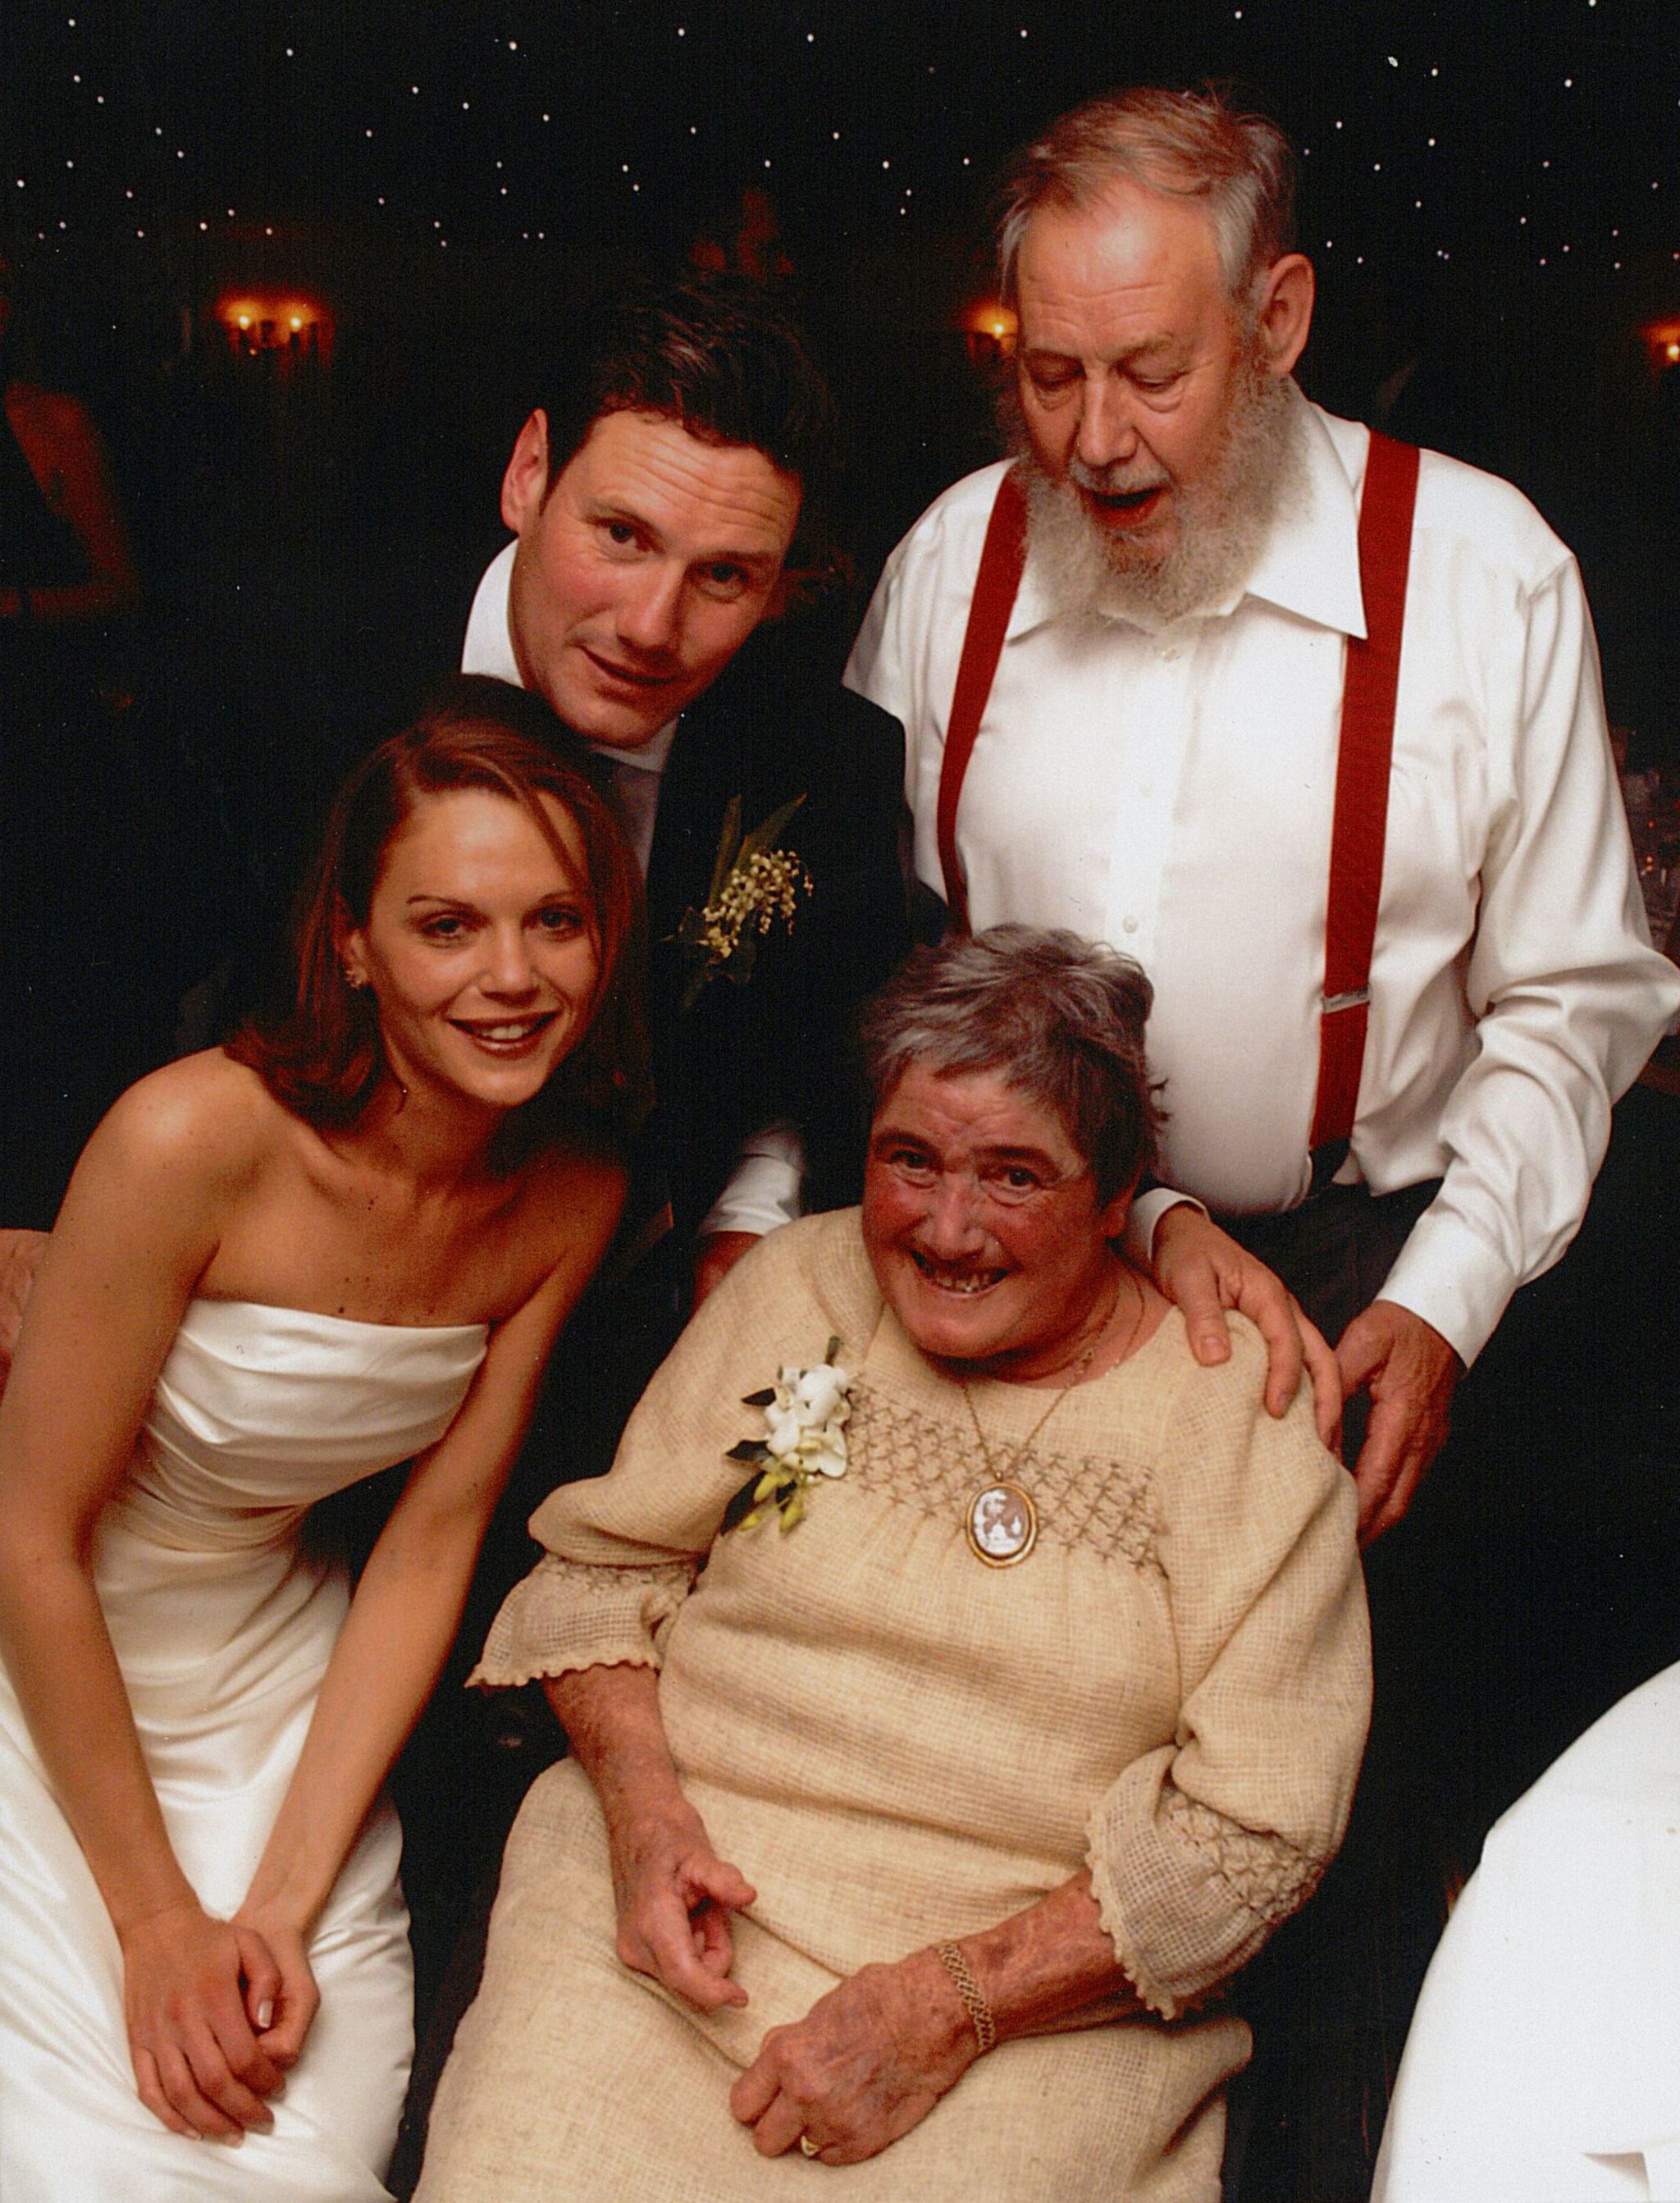 Sir Keir poses for a wedding day picture with his parents and new wife, Victoria, in 2007